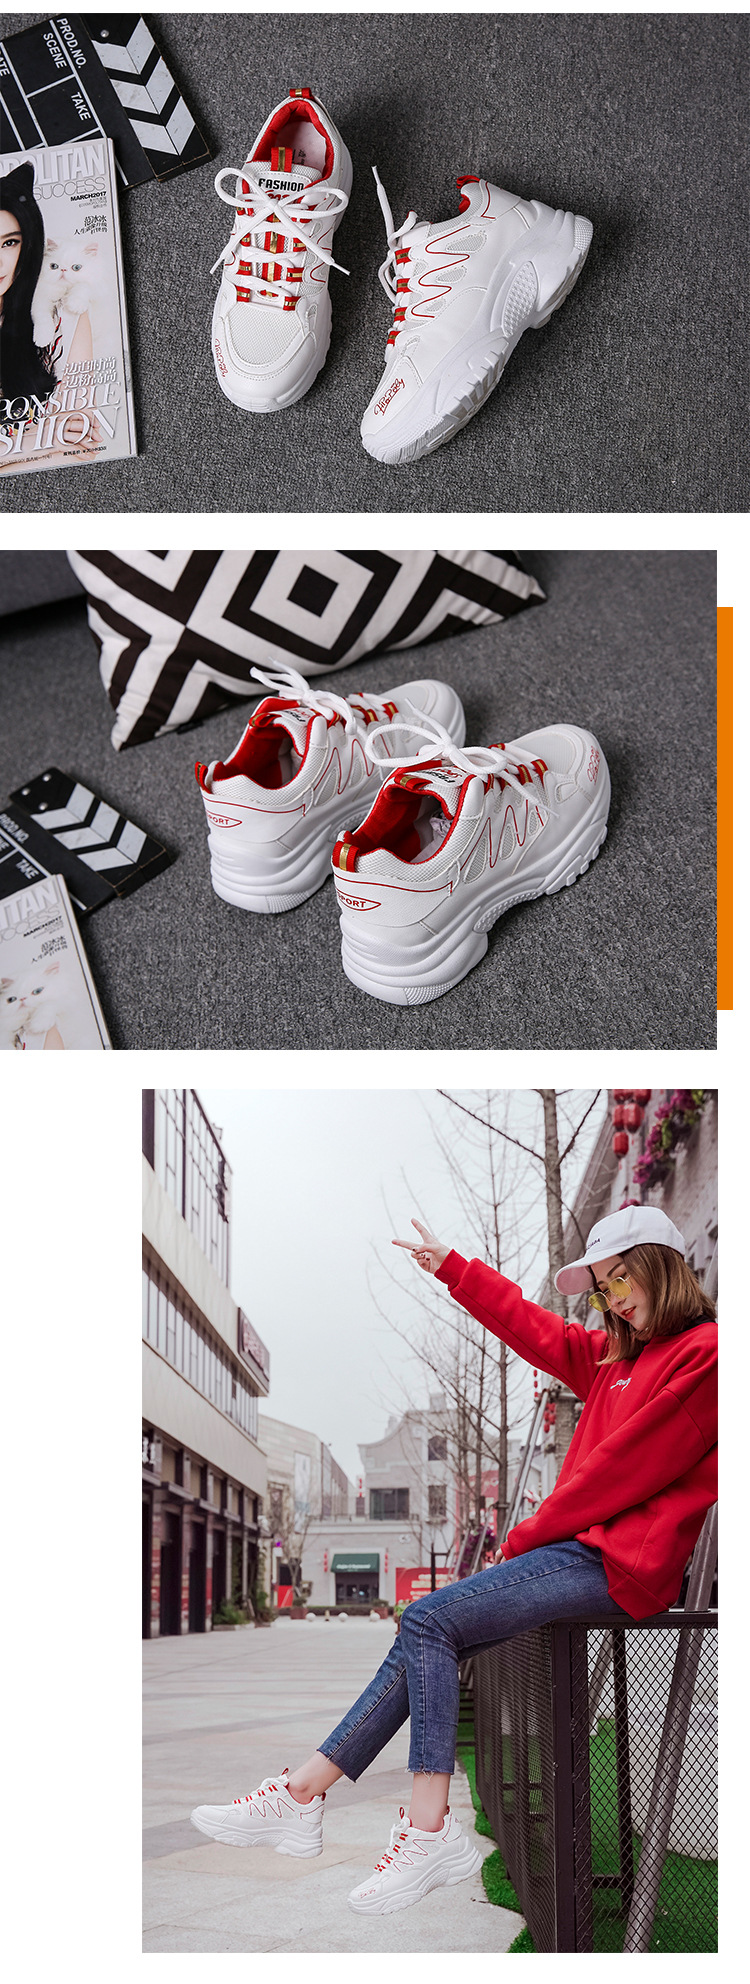 Daddy shoes women sneakers